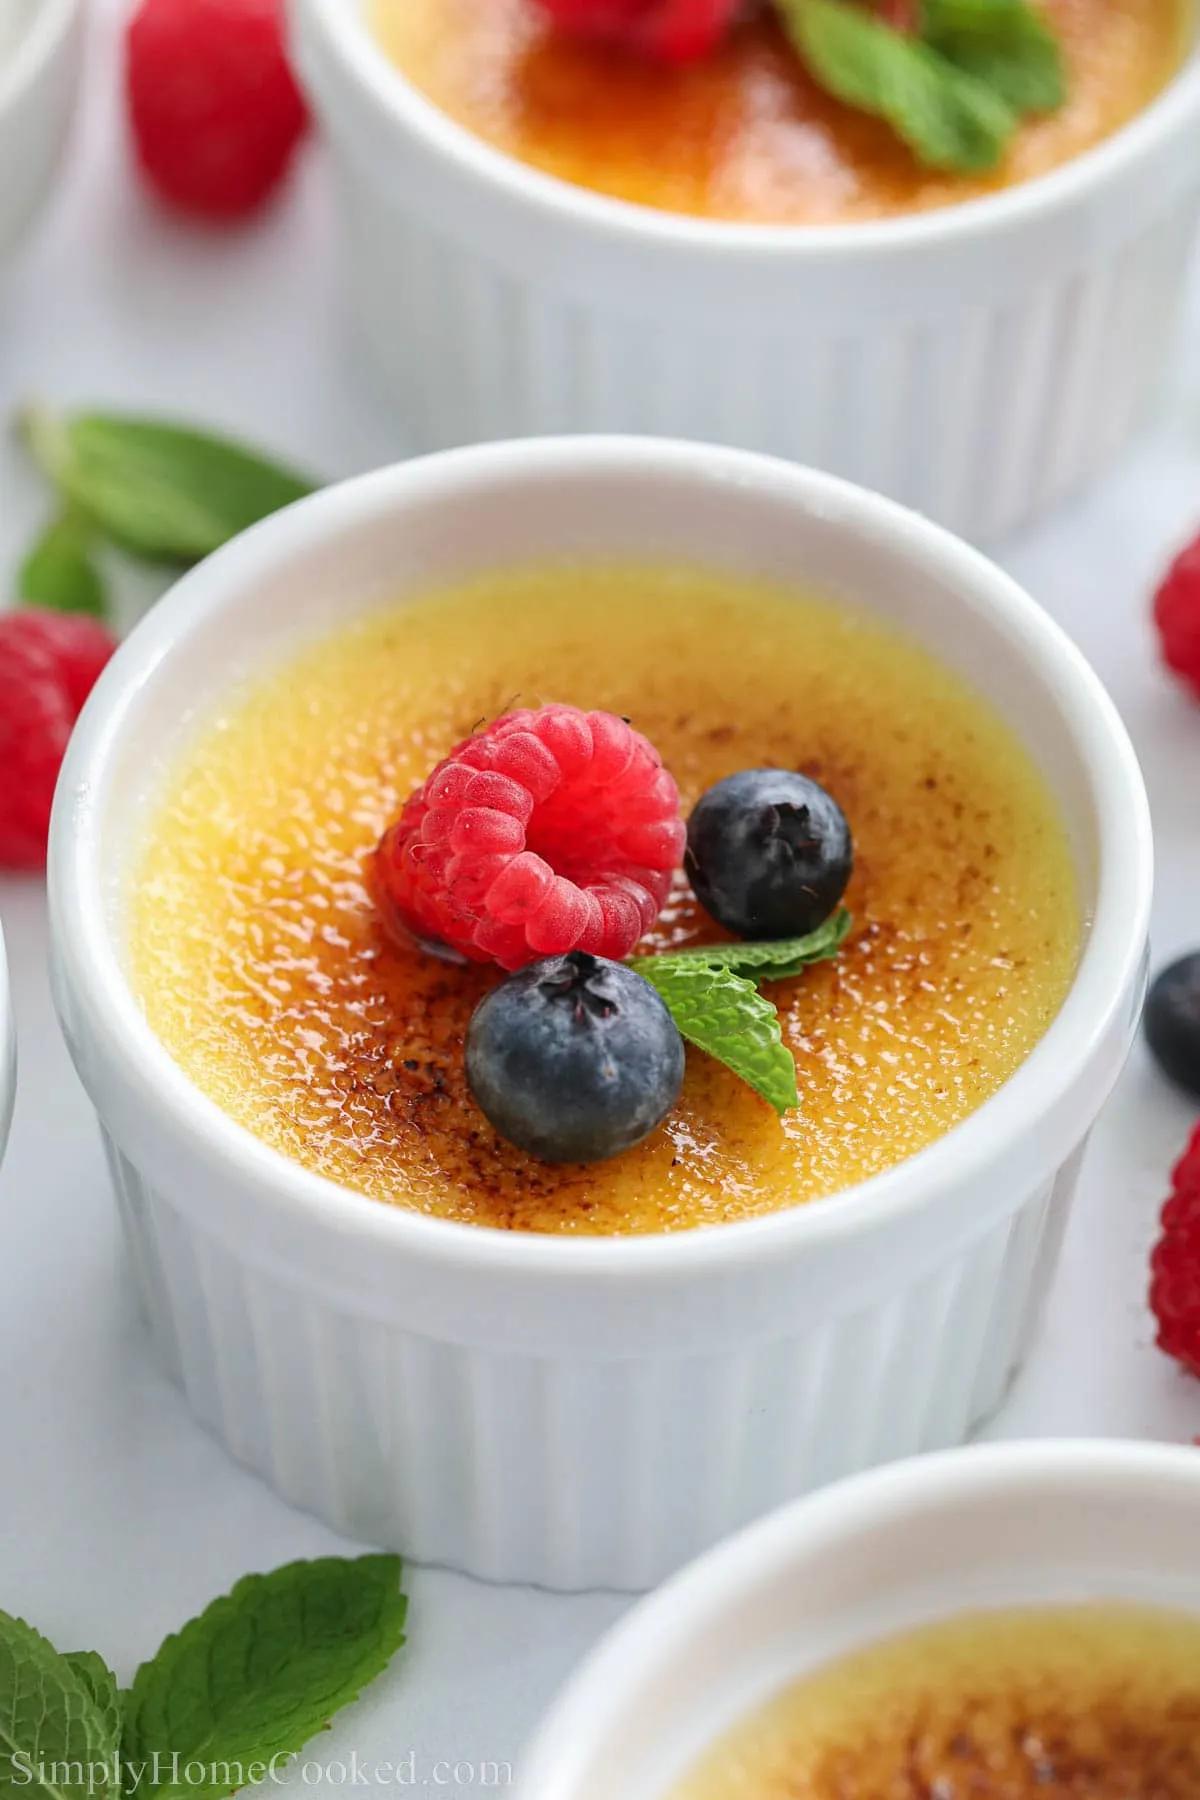 Crème Brulée Recipe (4 Ingredients) - Simply Home Cooked